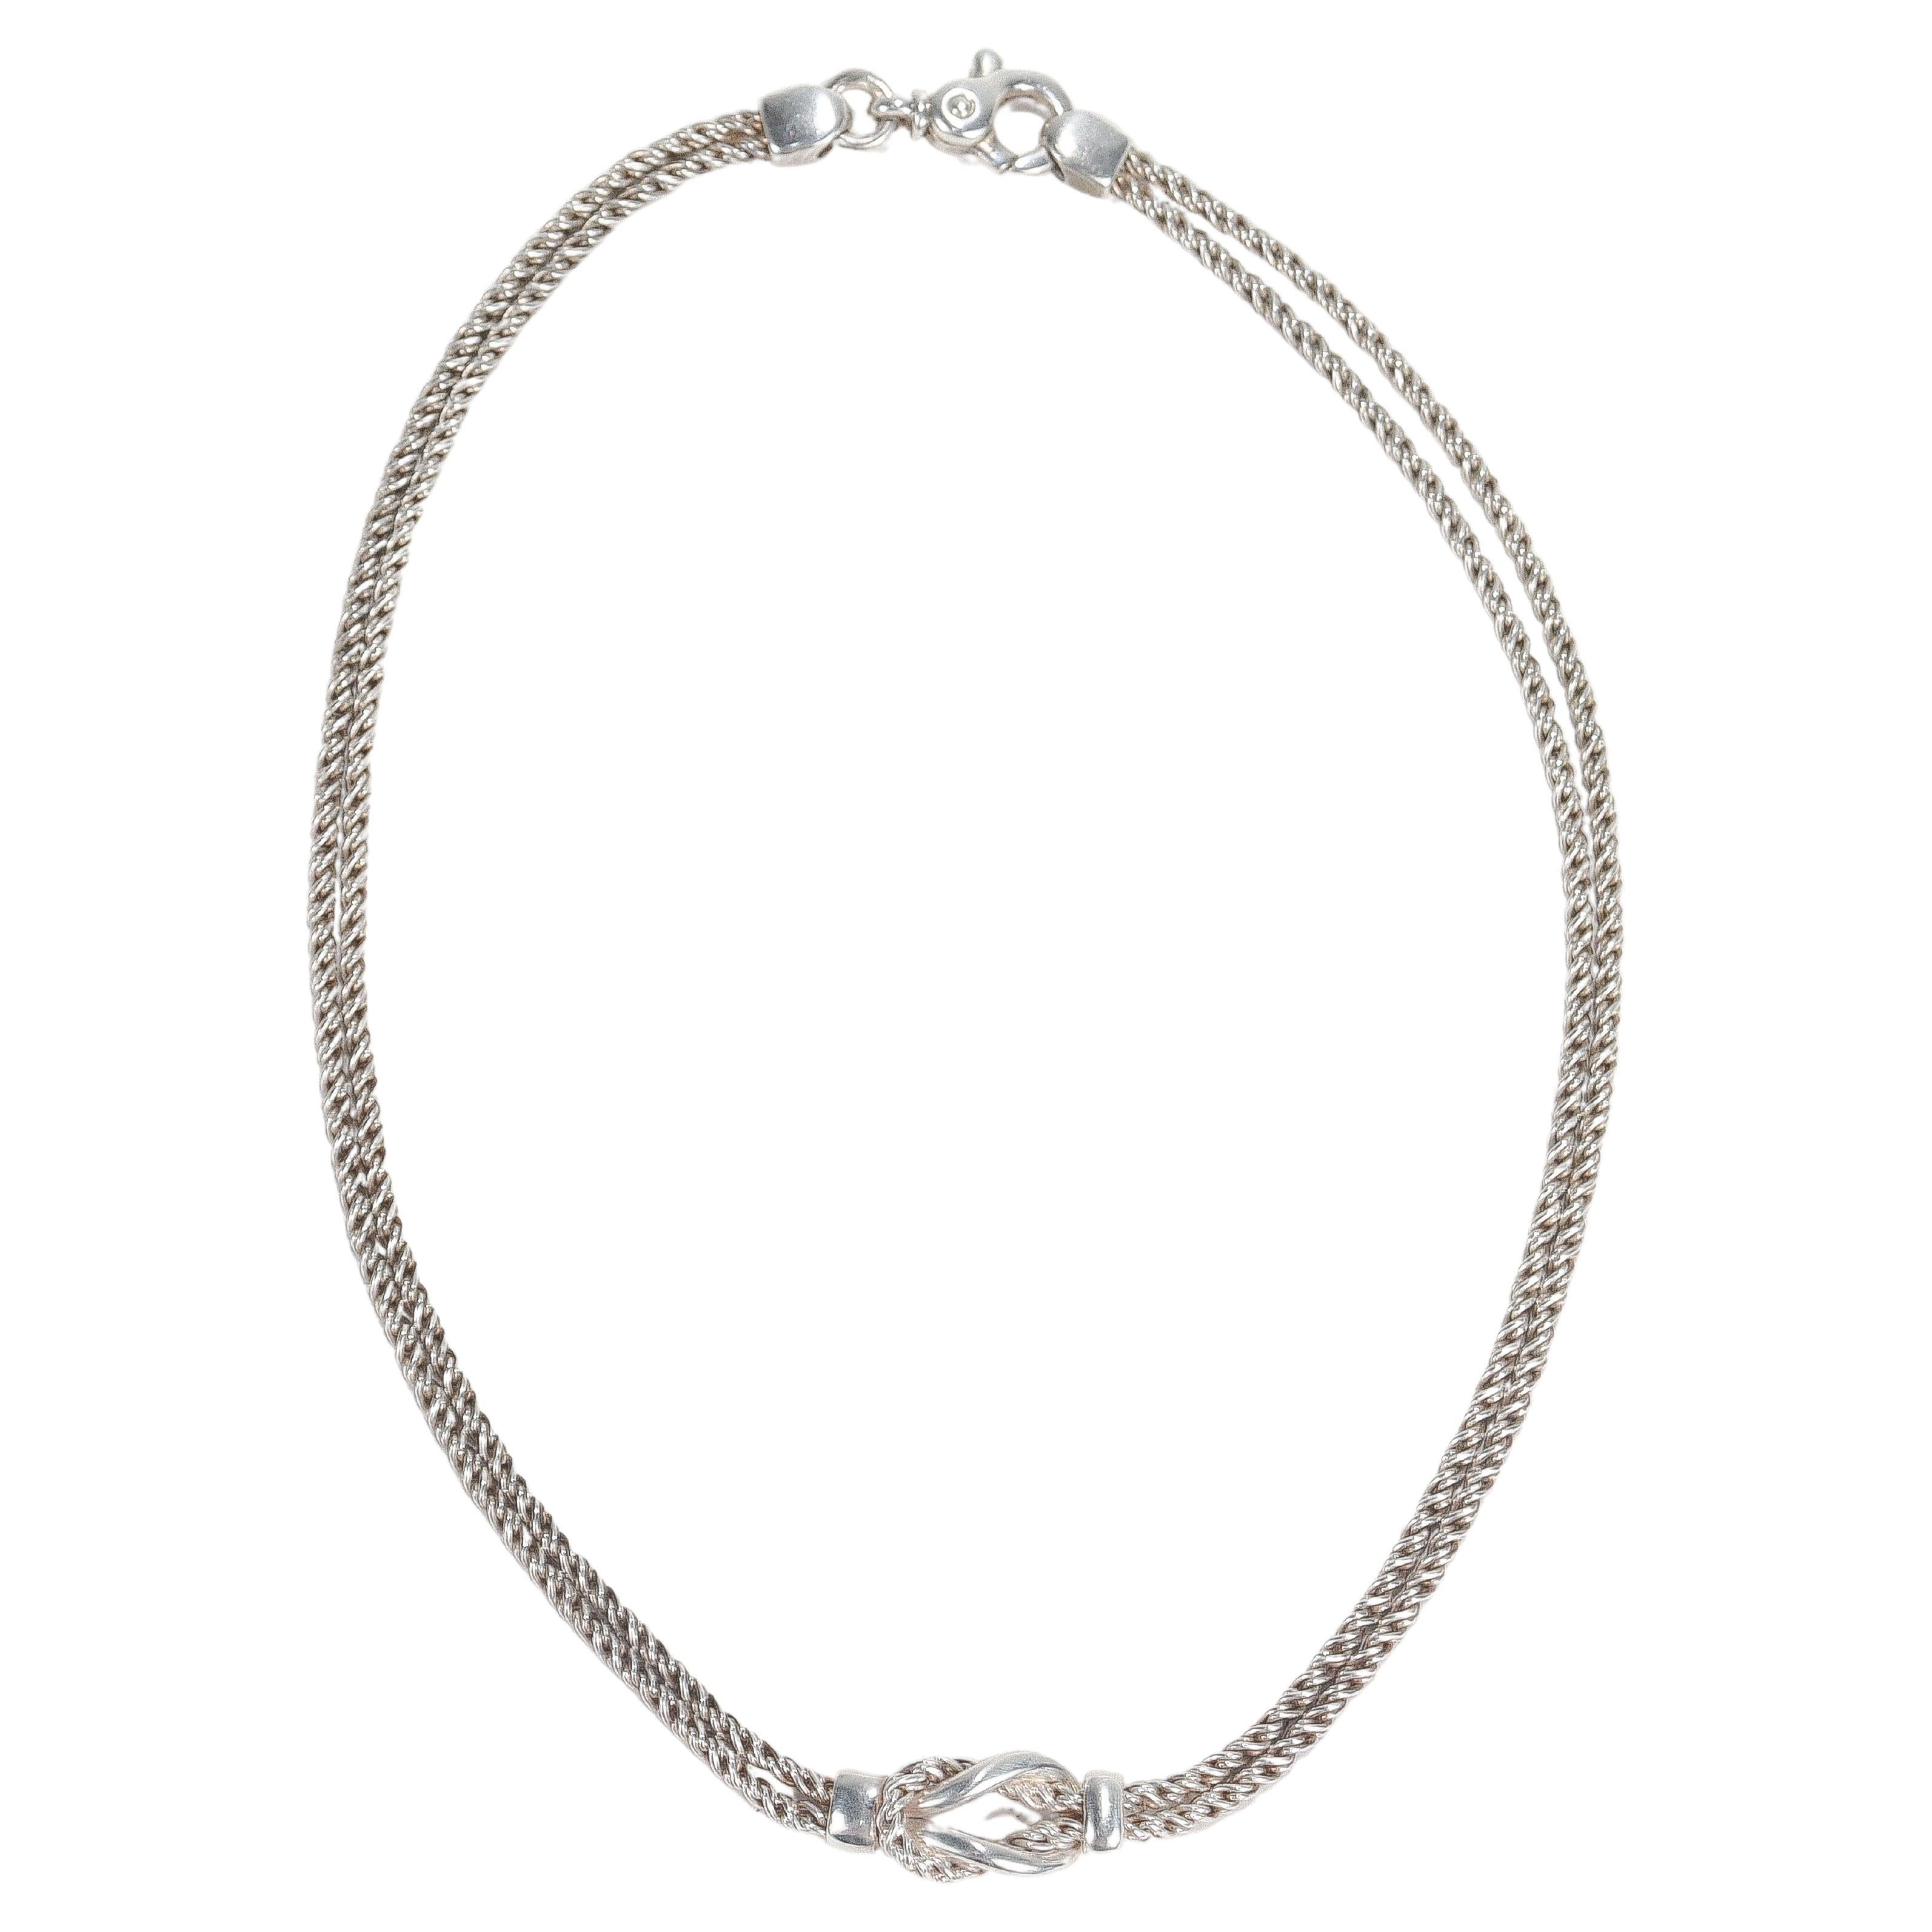 Tiffany & Co Sterling Silver Double Love Knot Rope Chain Necklace